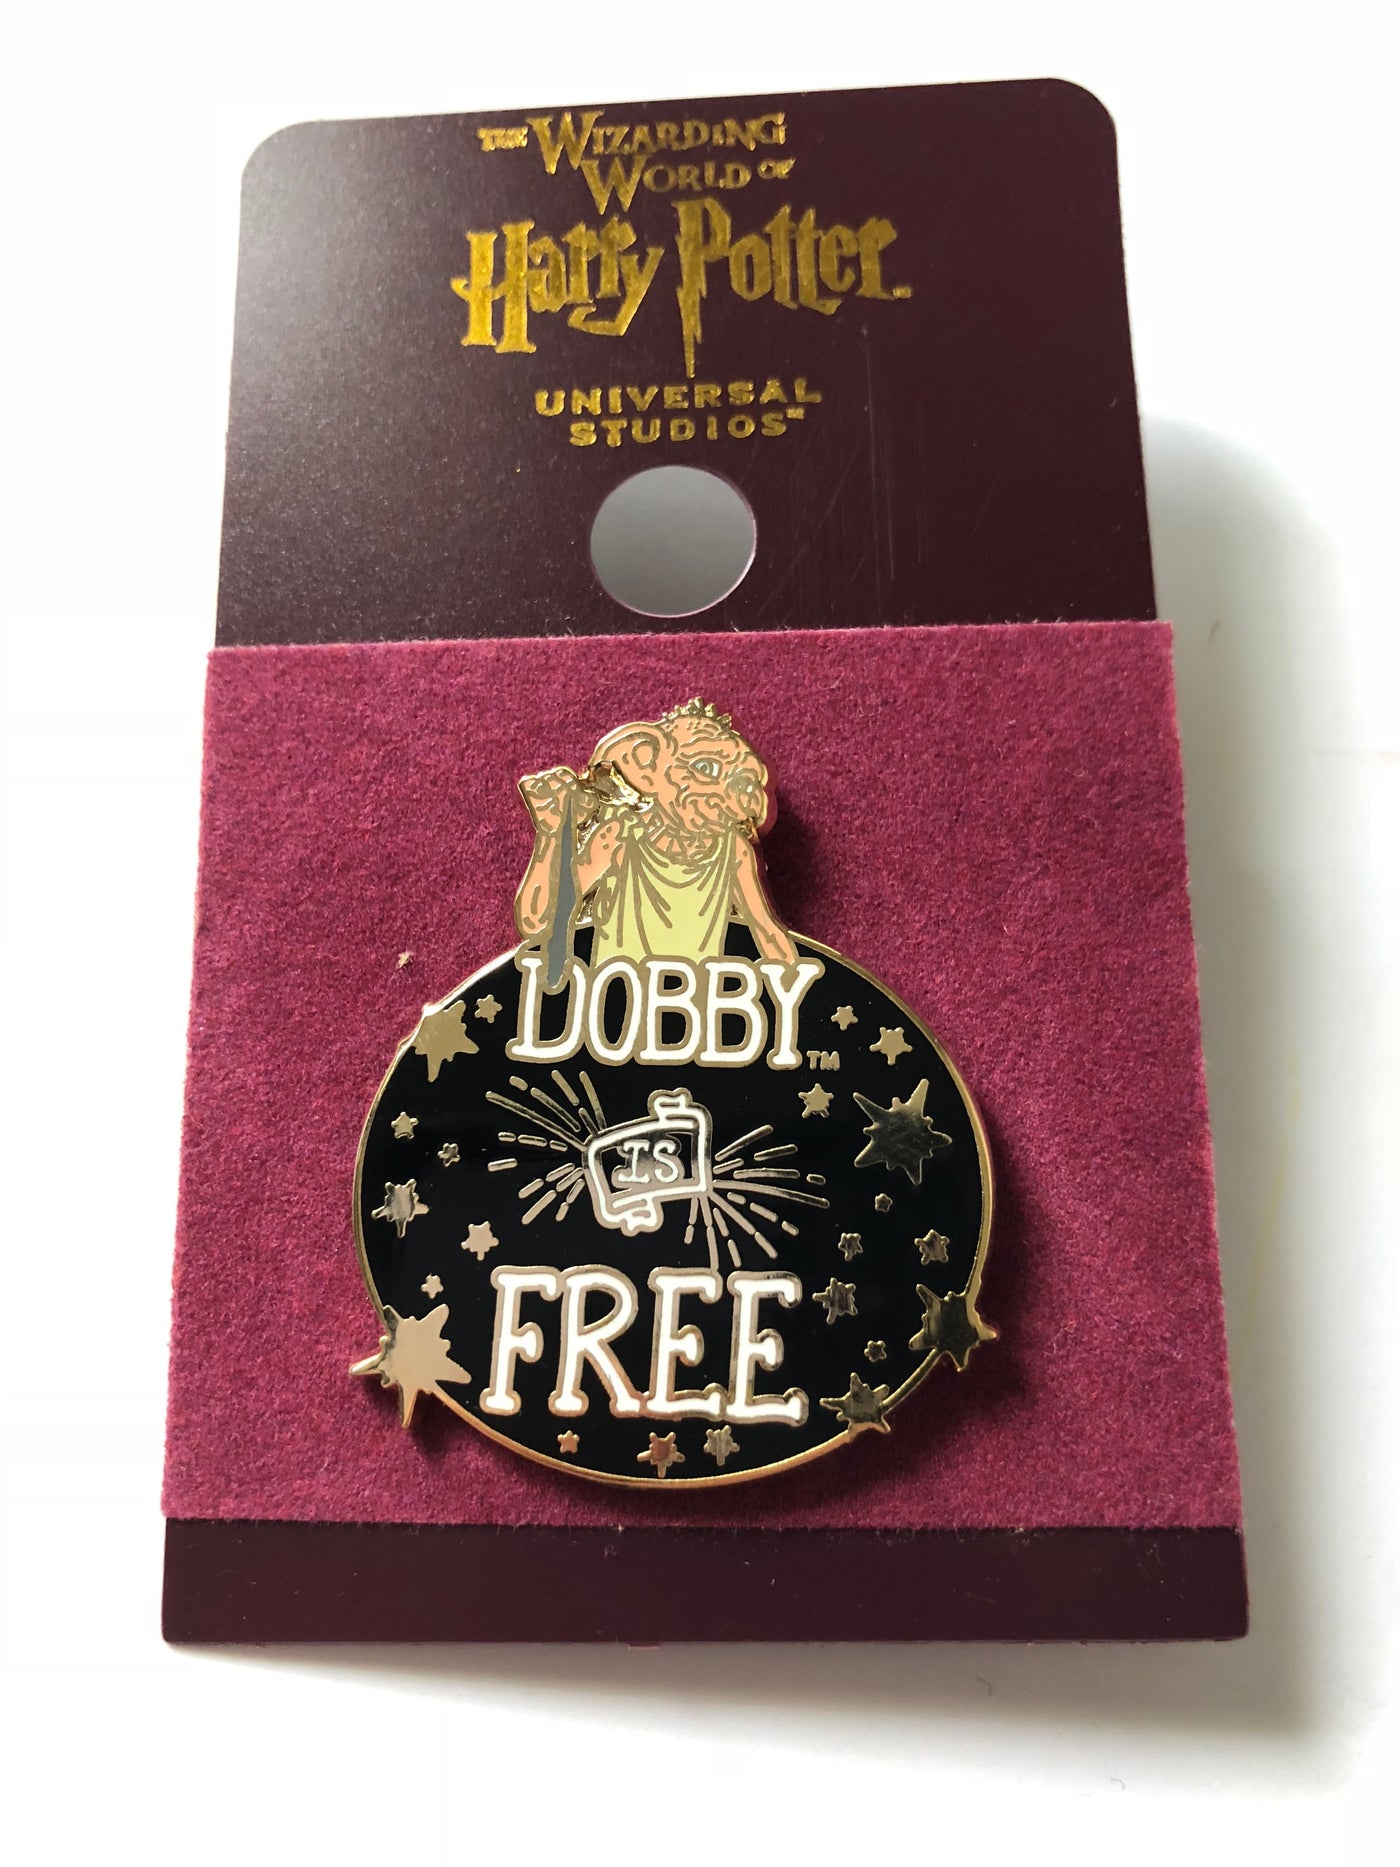 Universal Studios Harry Potter Dobby is Free Pin New with Card